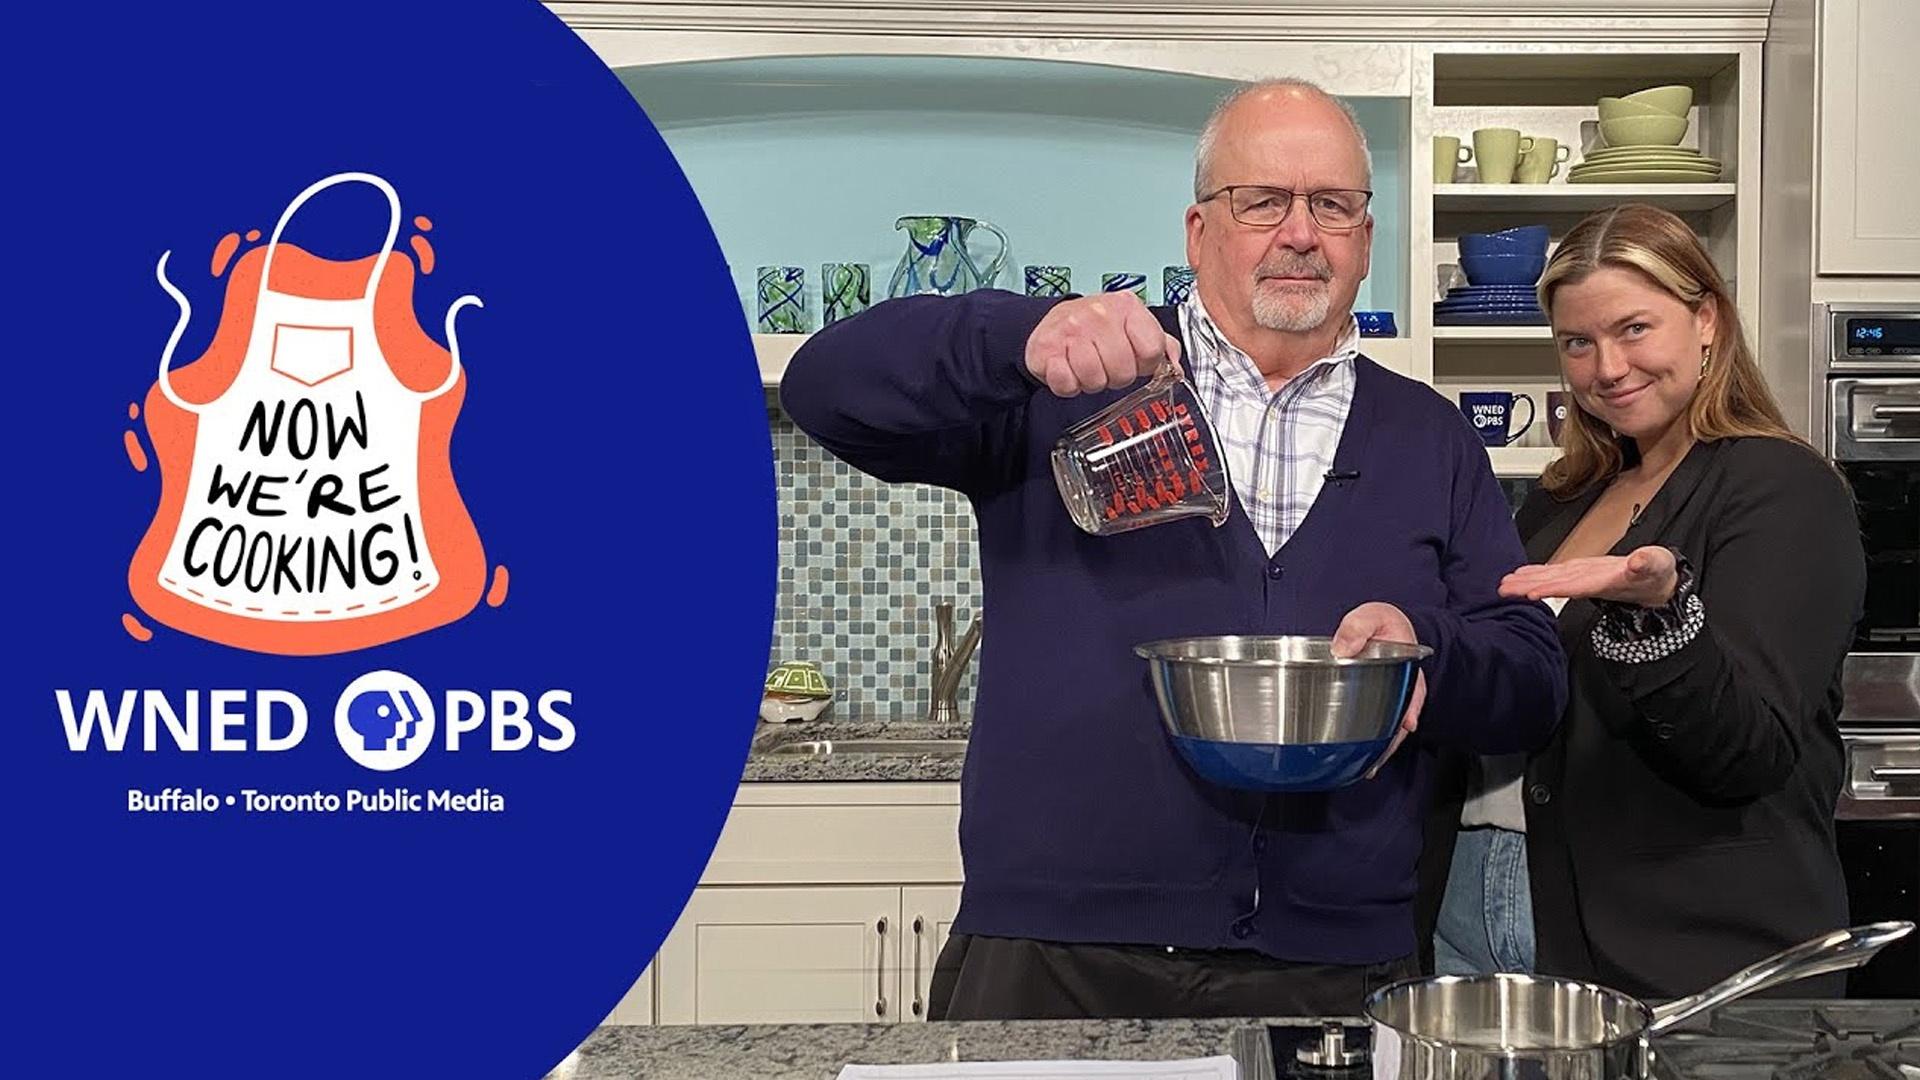 Now We're Cooking on WNED PBS Saturday at 1:30pm.